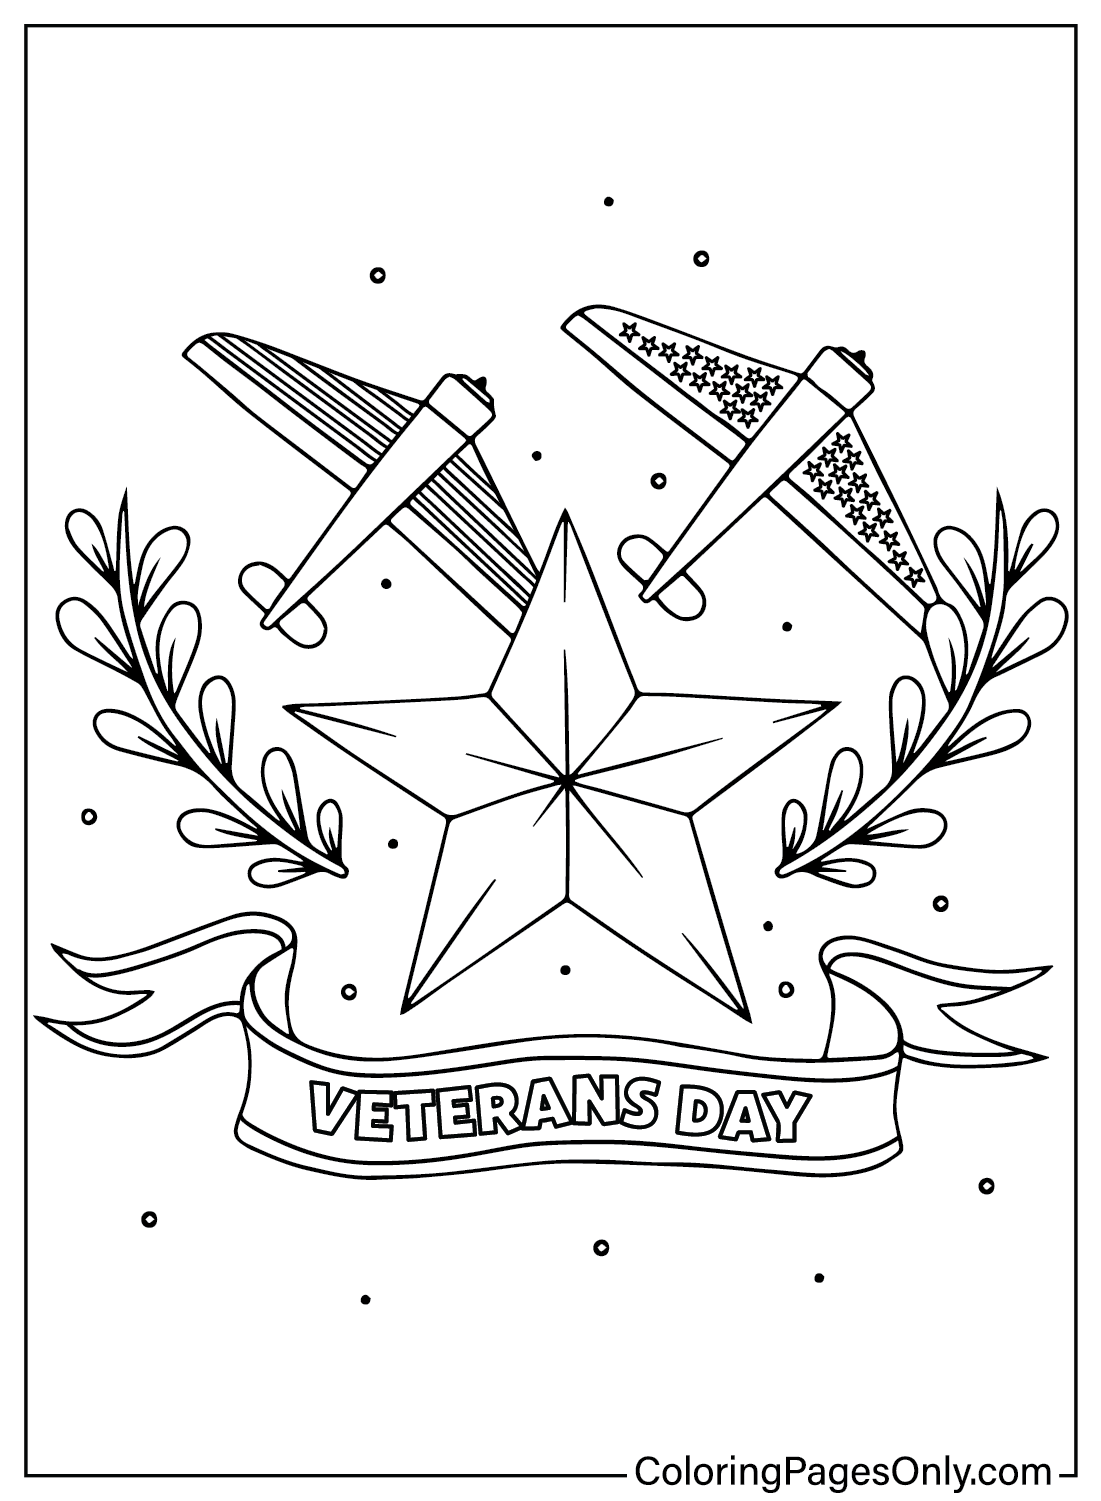 Printable Veterans Day Coloring Page